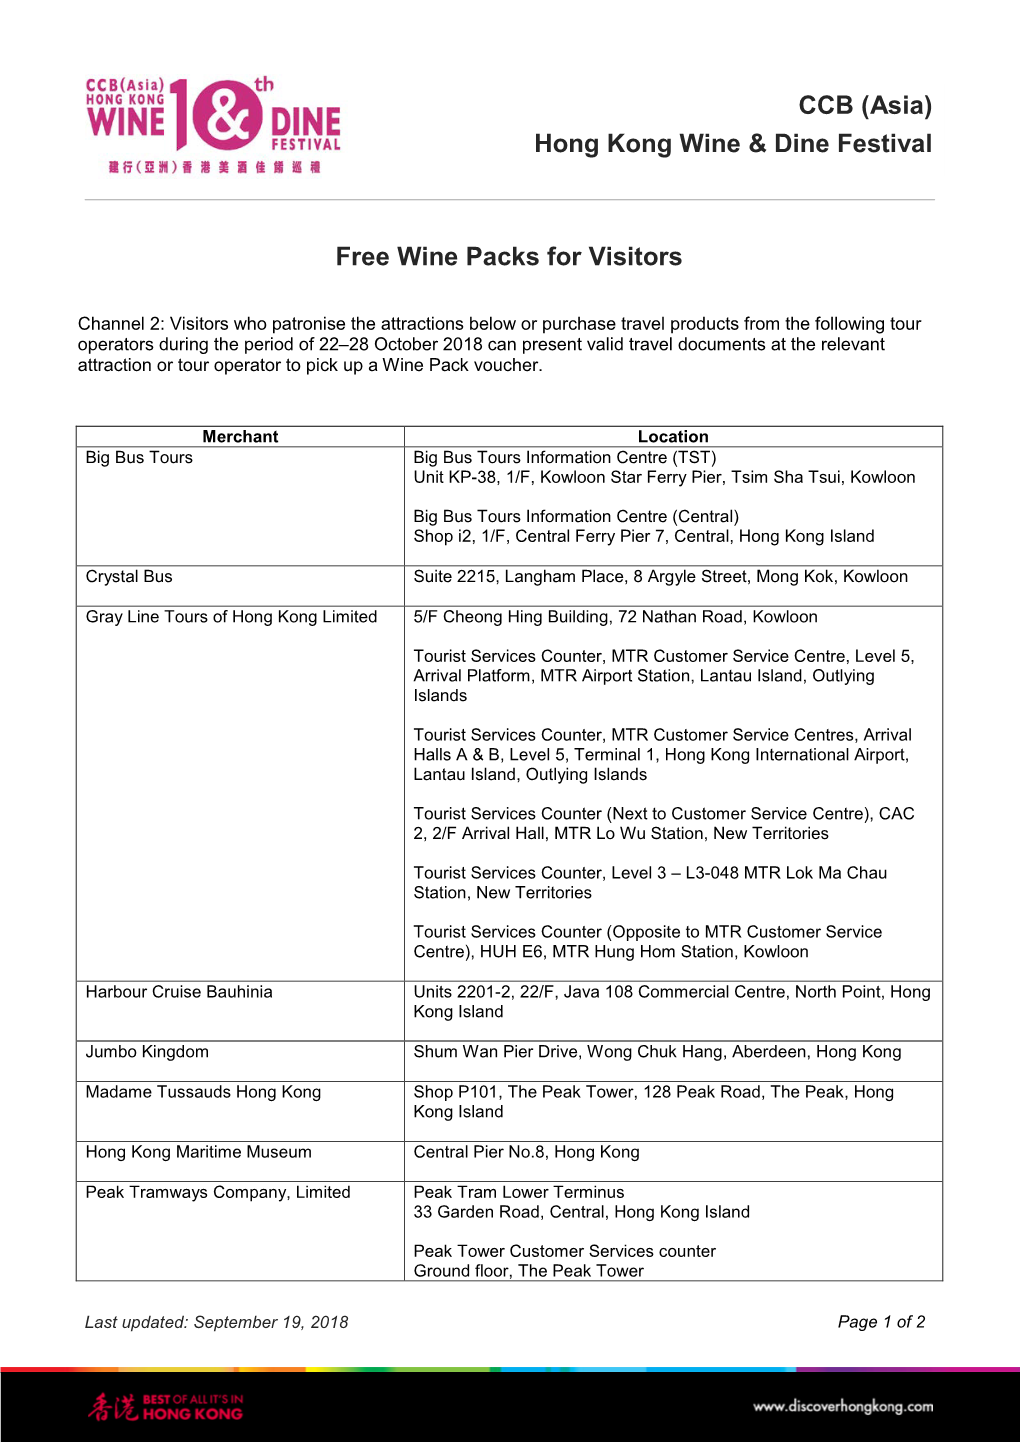 CCB (Asia) Hong Kong Wine & Dine Festival Free Wine Packs for Visitors